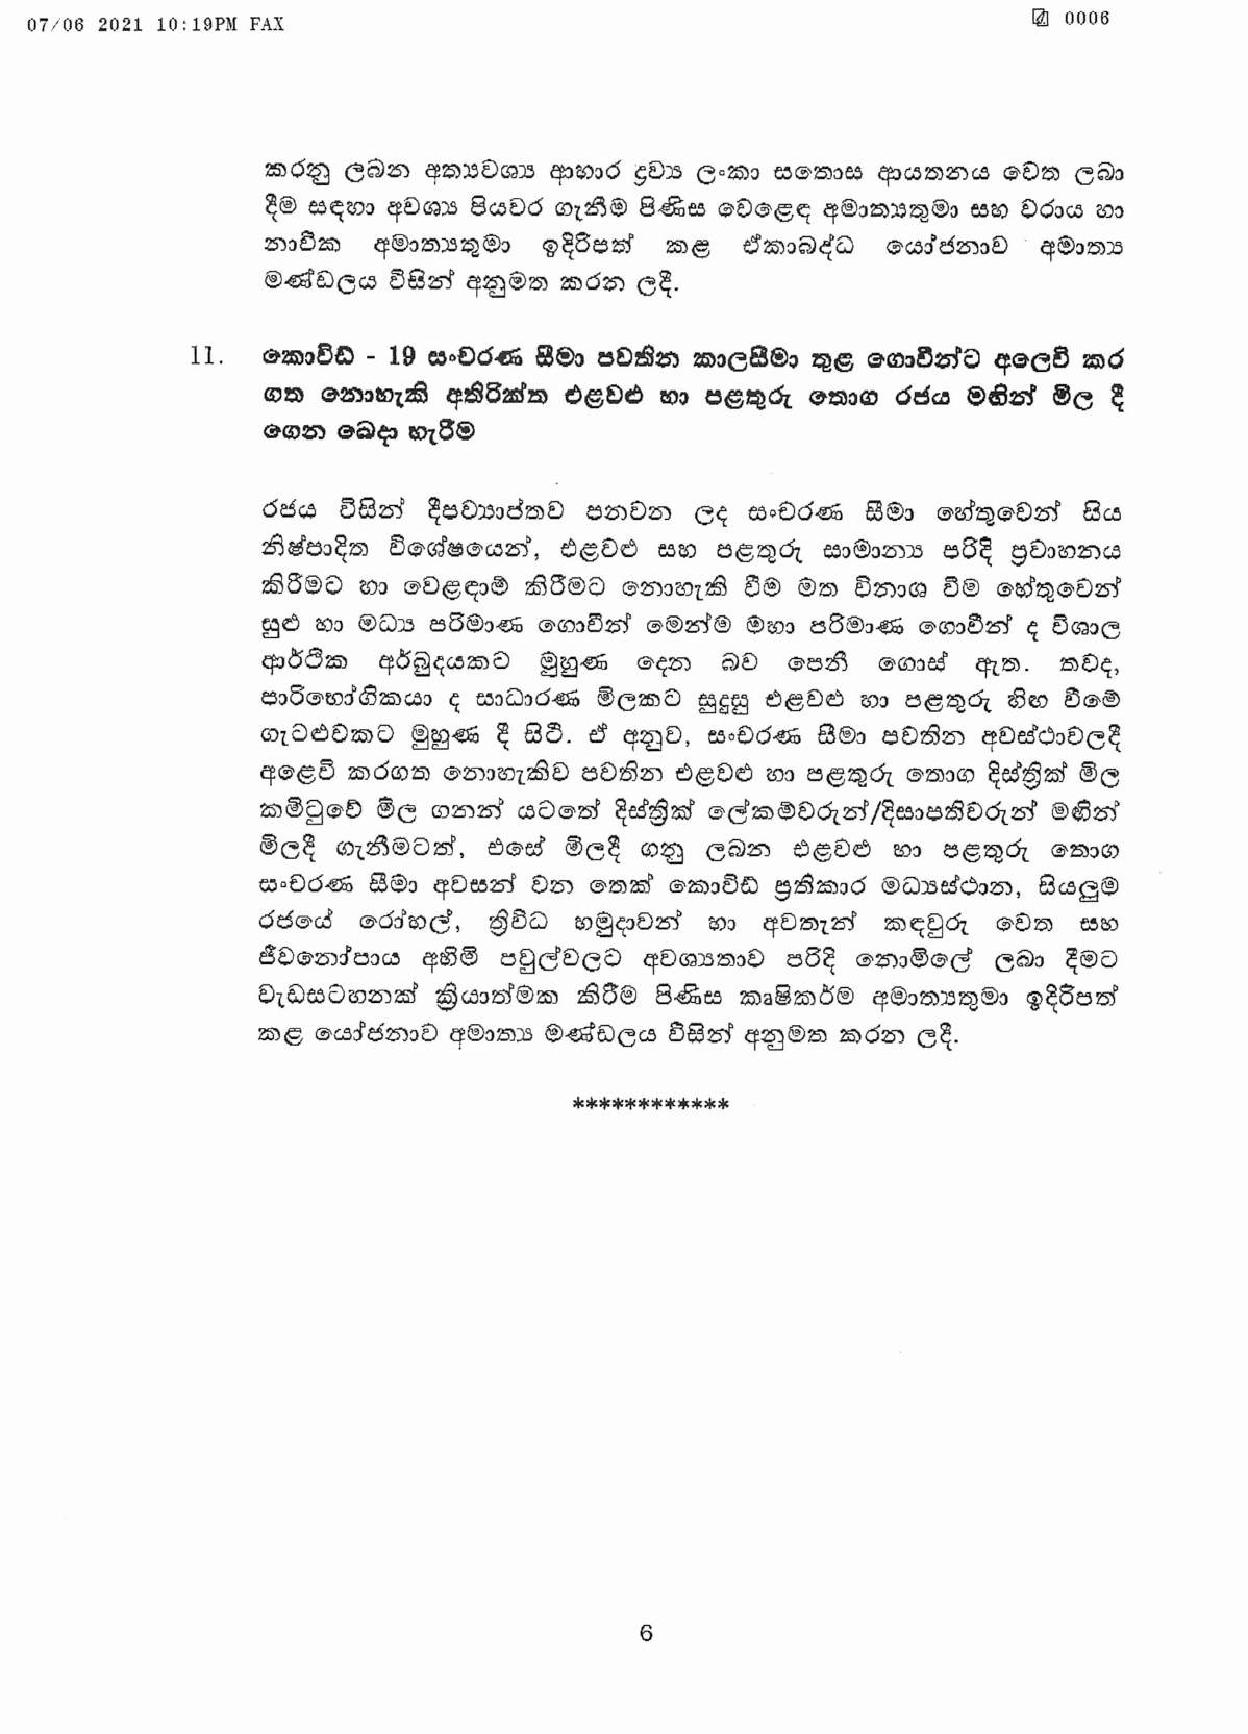 Cabinet Decisions on 07.06.2021 page 001